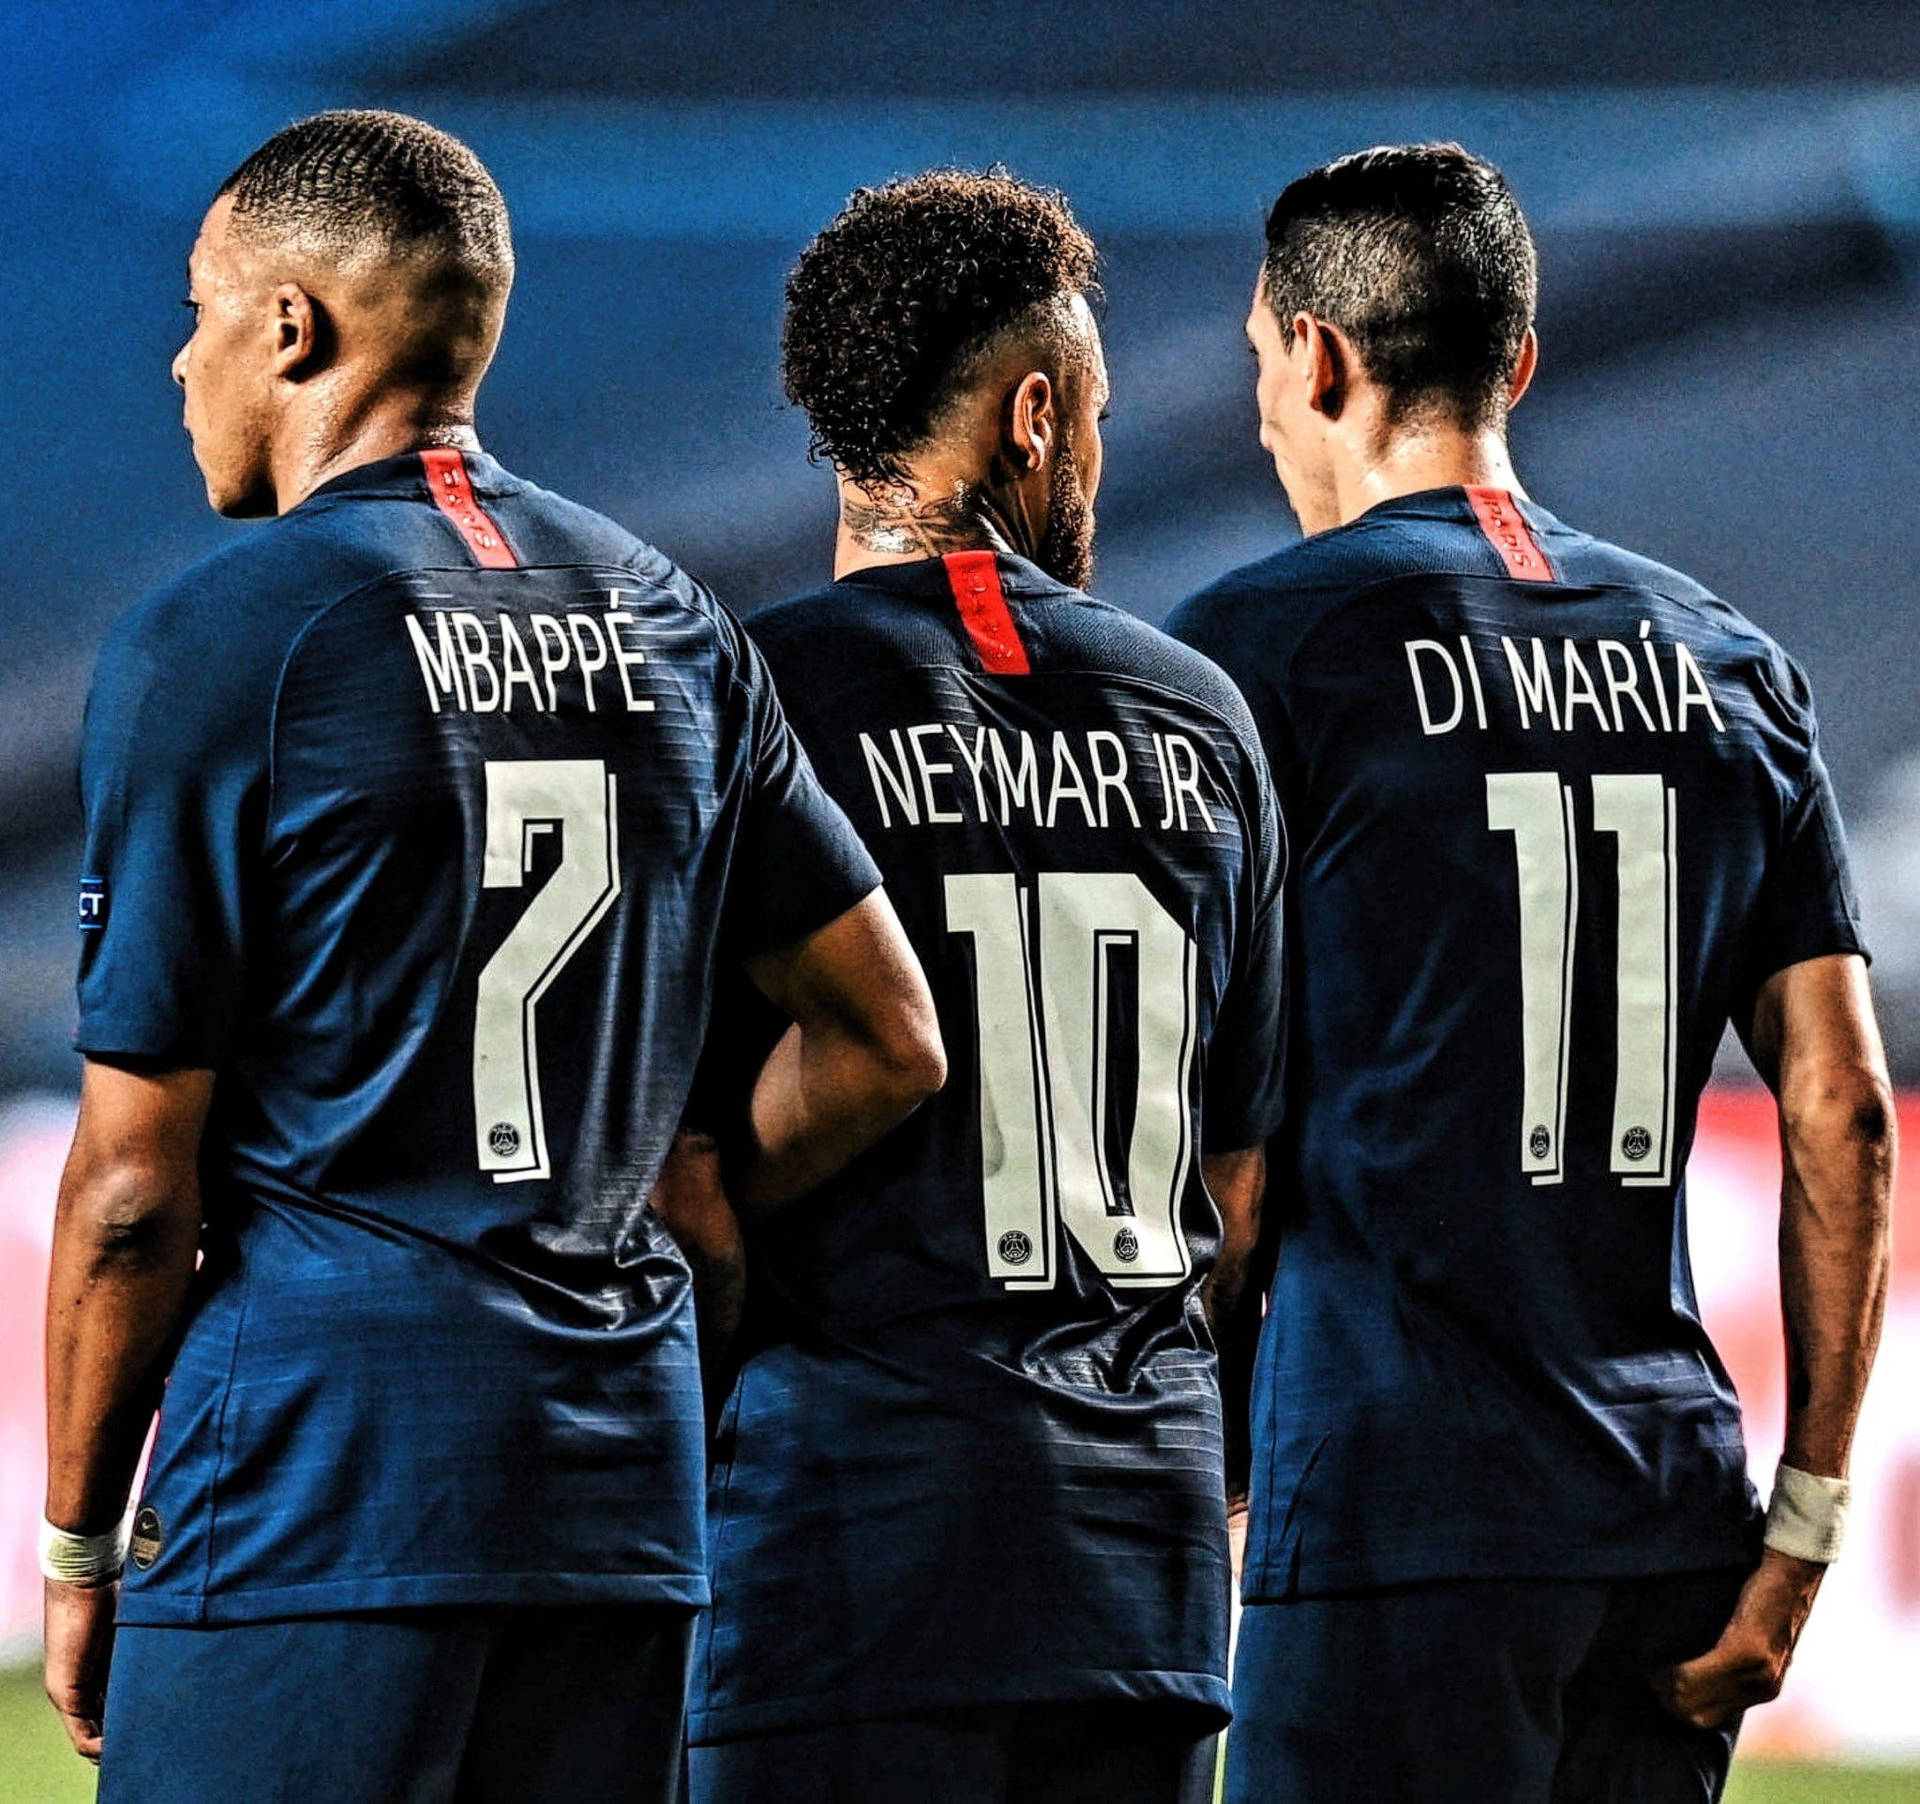 Neymar And Mbappe With Di Maria Wallpaper